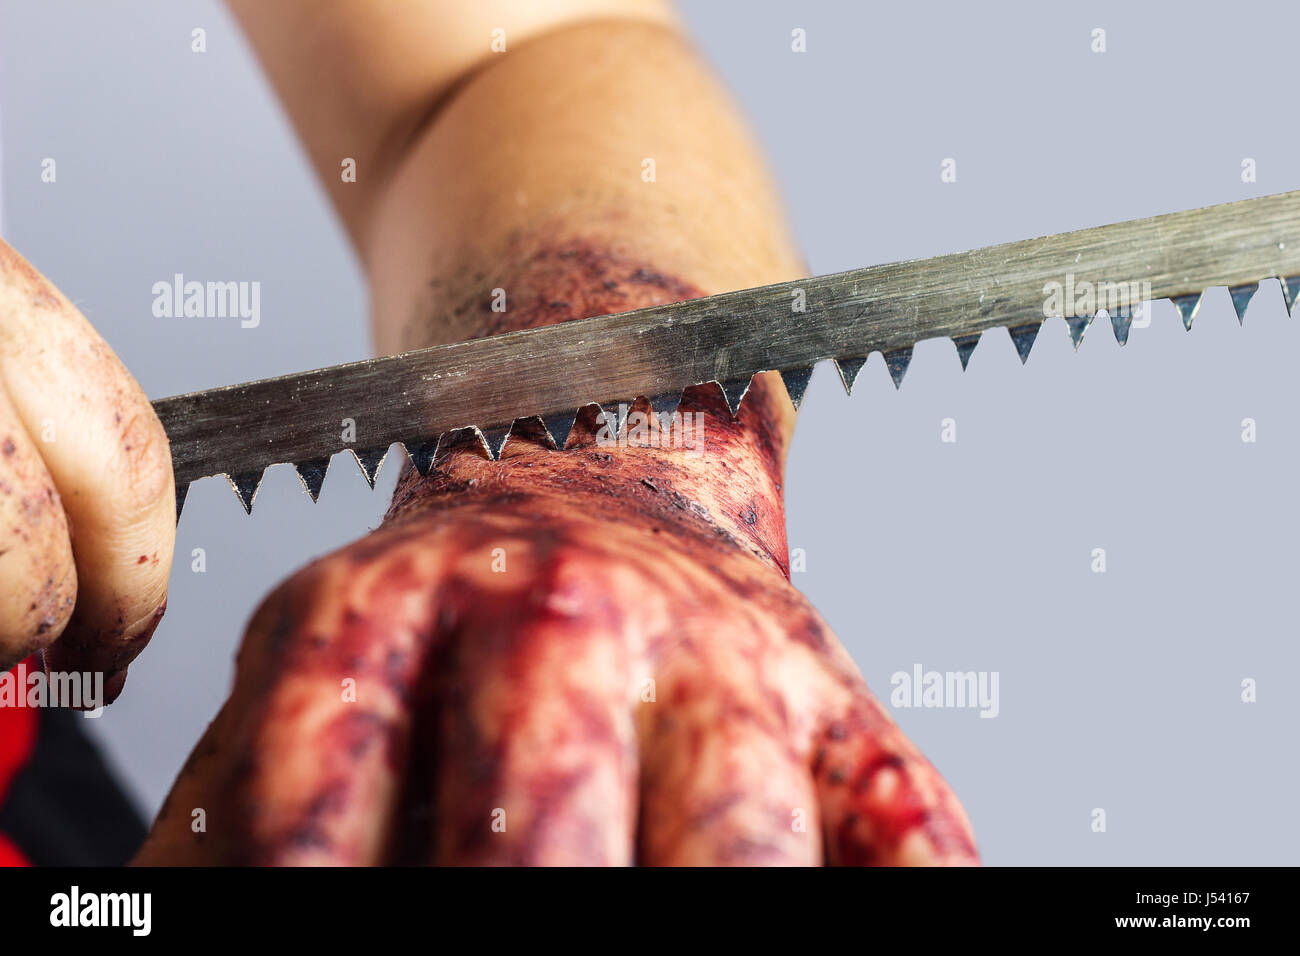 cutting into bloody hand with saw blade in front of grey background Stock Photo